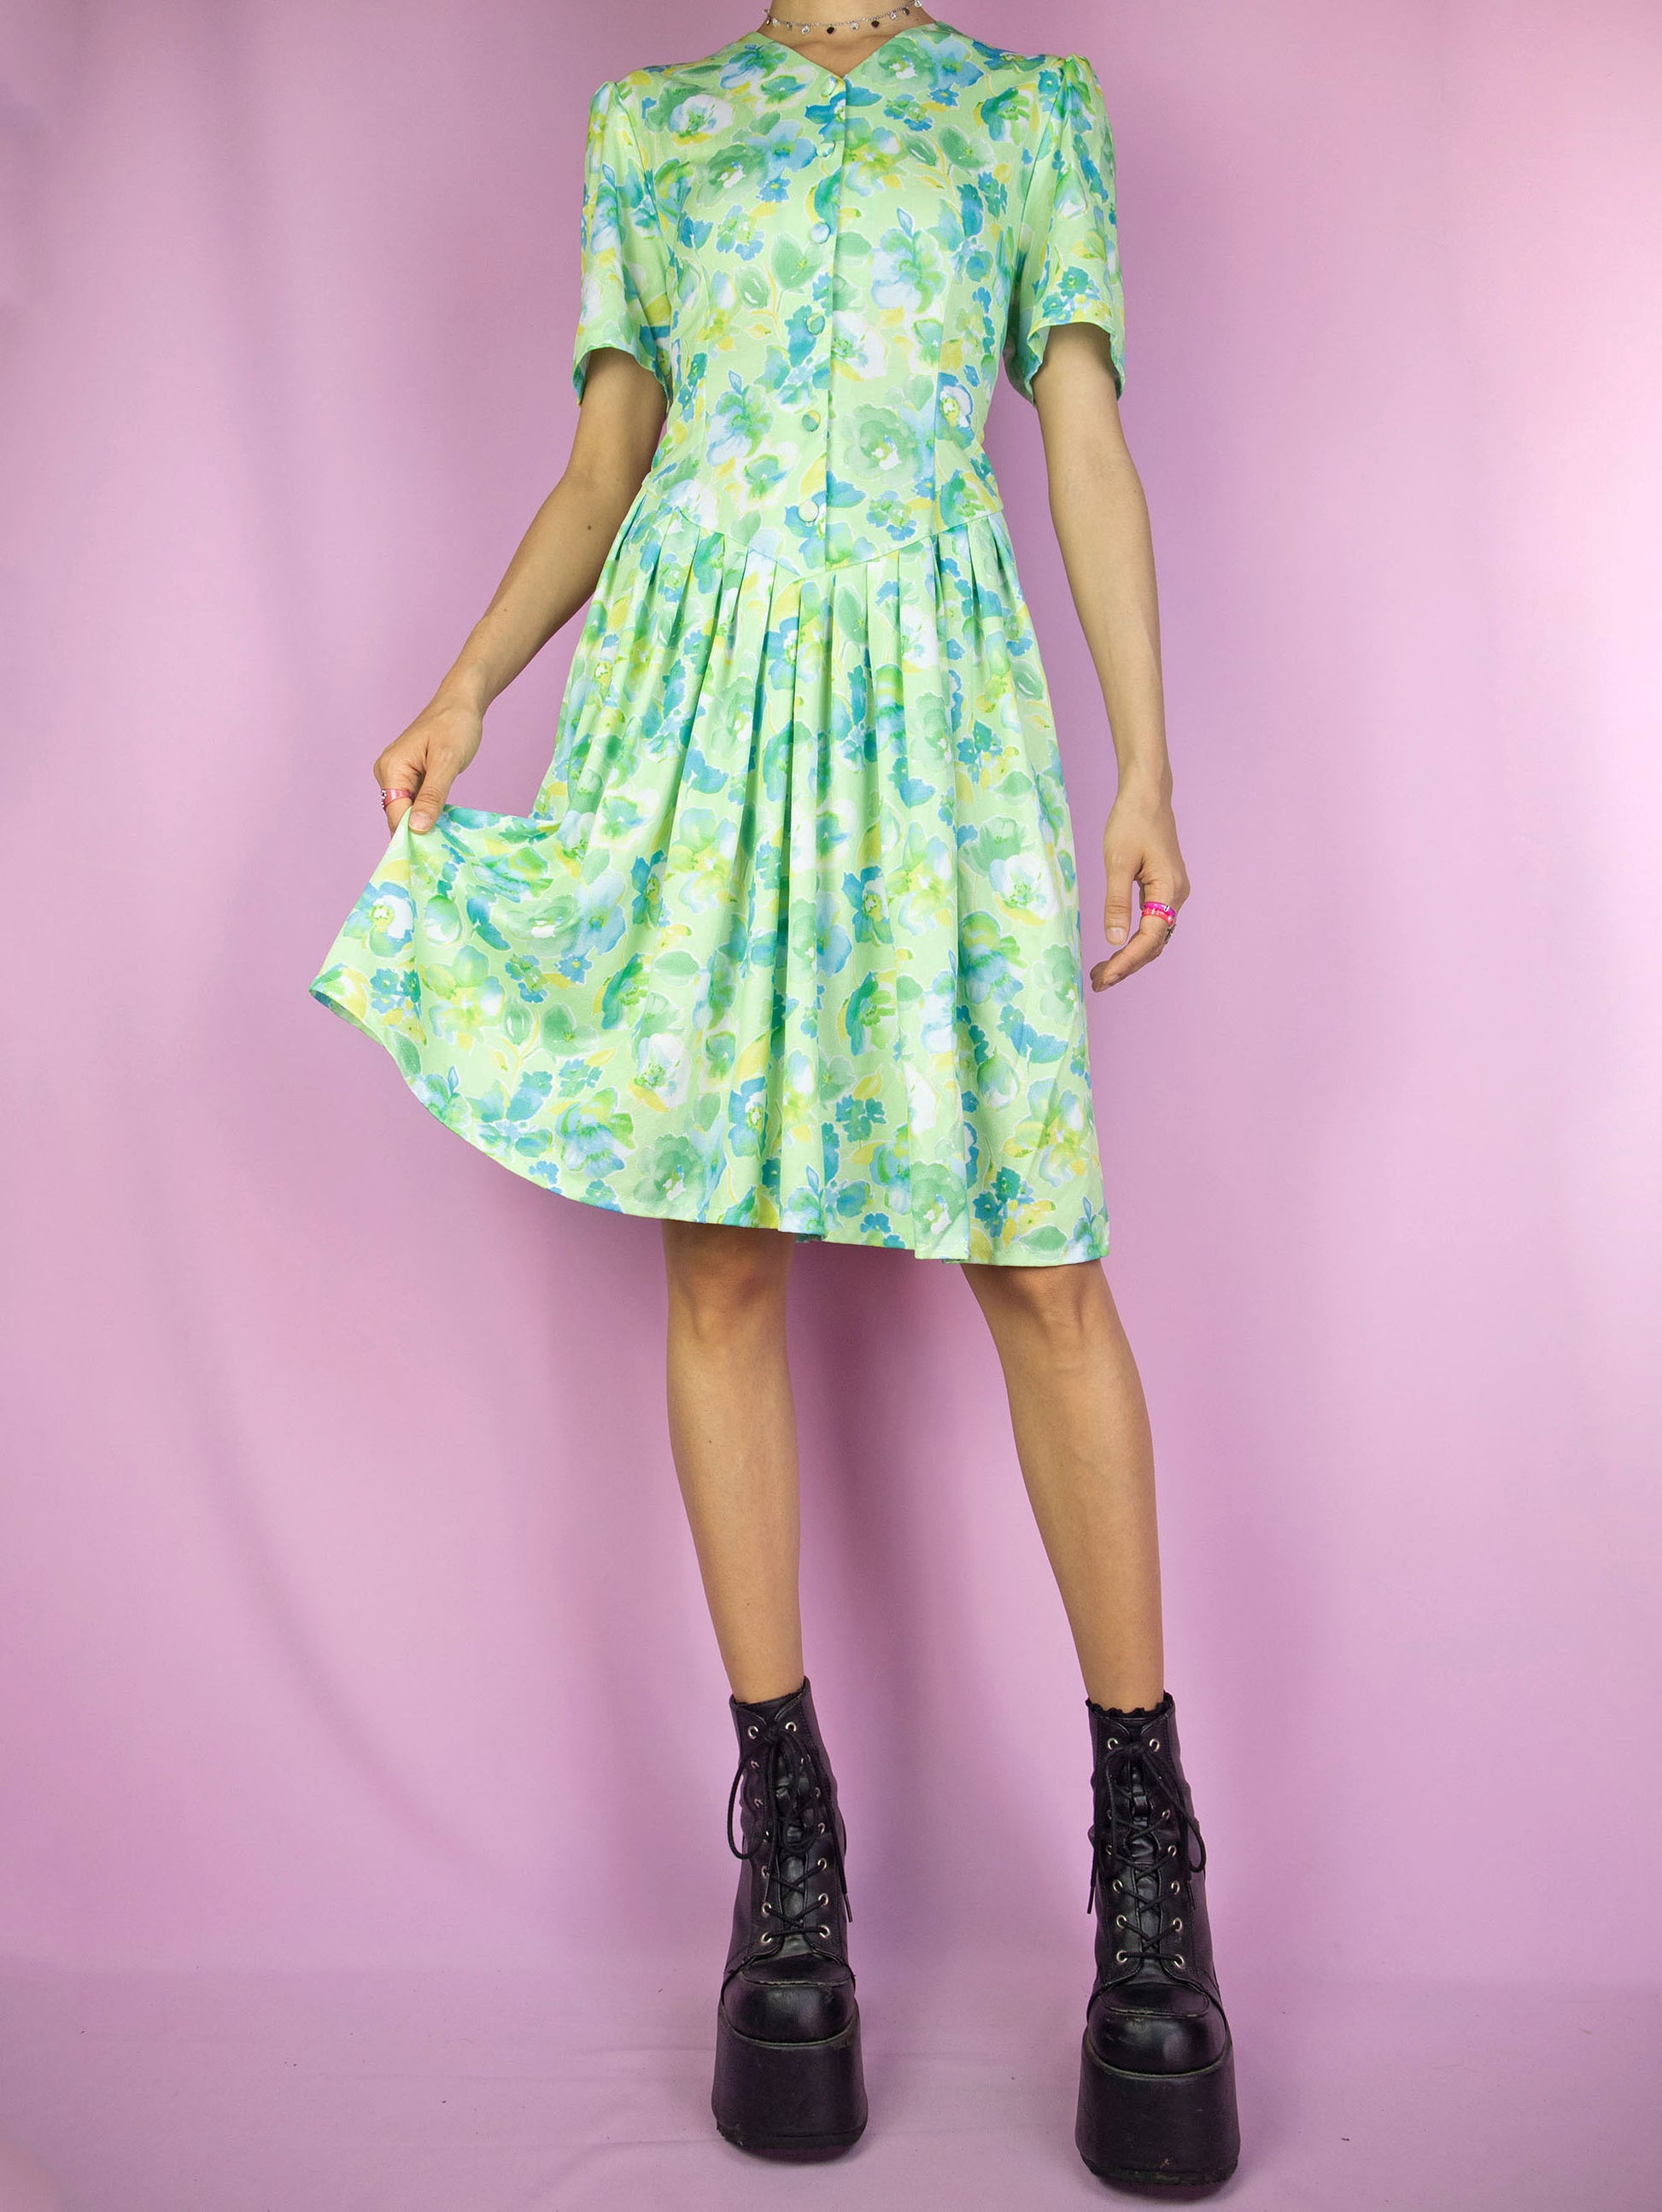 The Vintage 90s Retro Green Floral Dress is a light green blue and yellow floral short sleeve button pleated dress. Boho grunge 1990s summer mini dress.